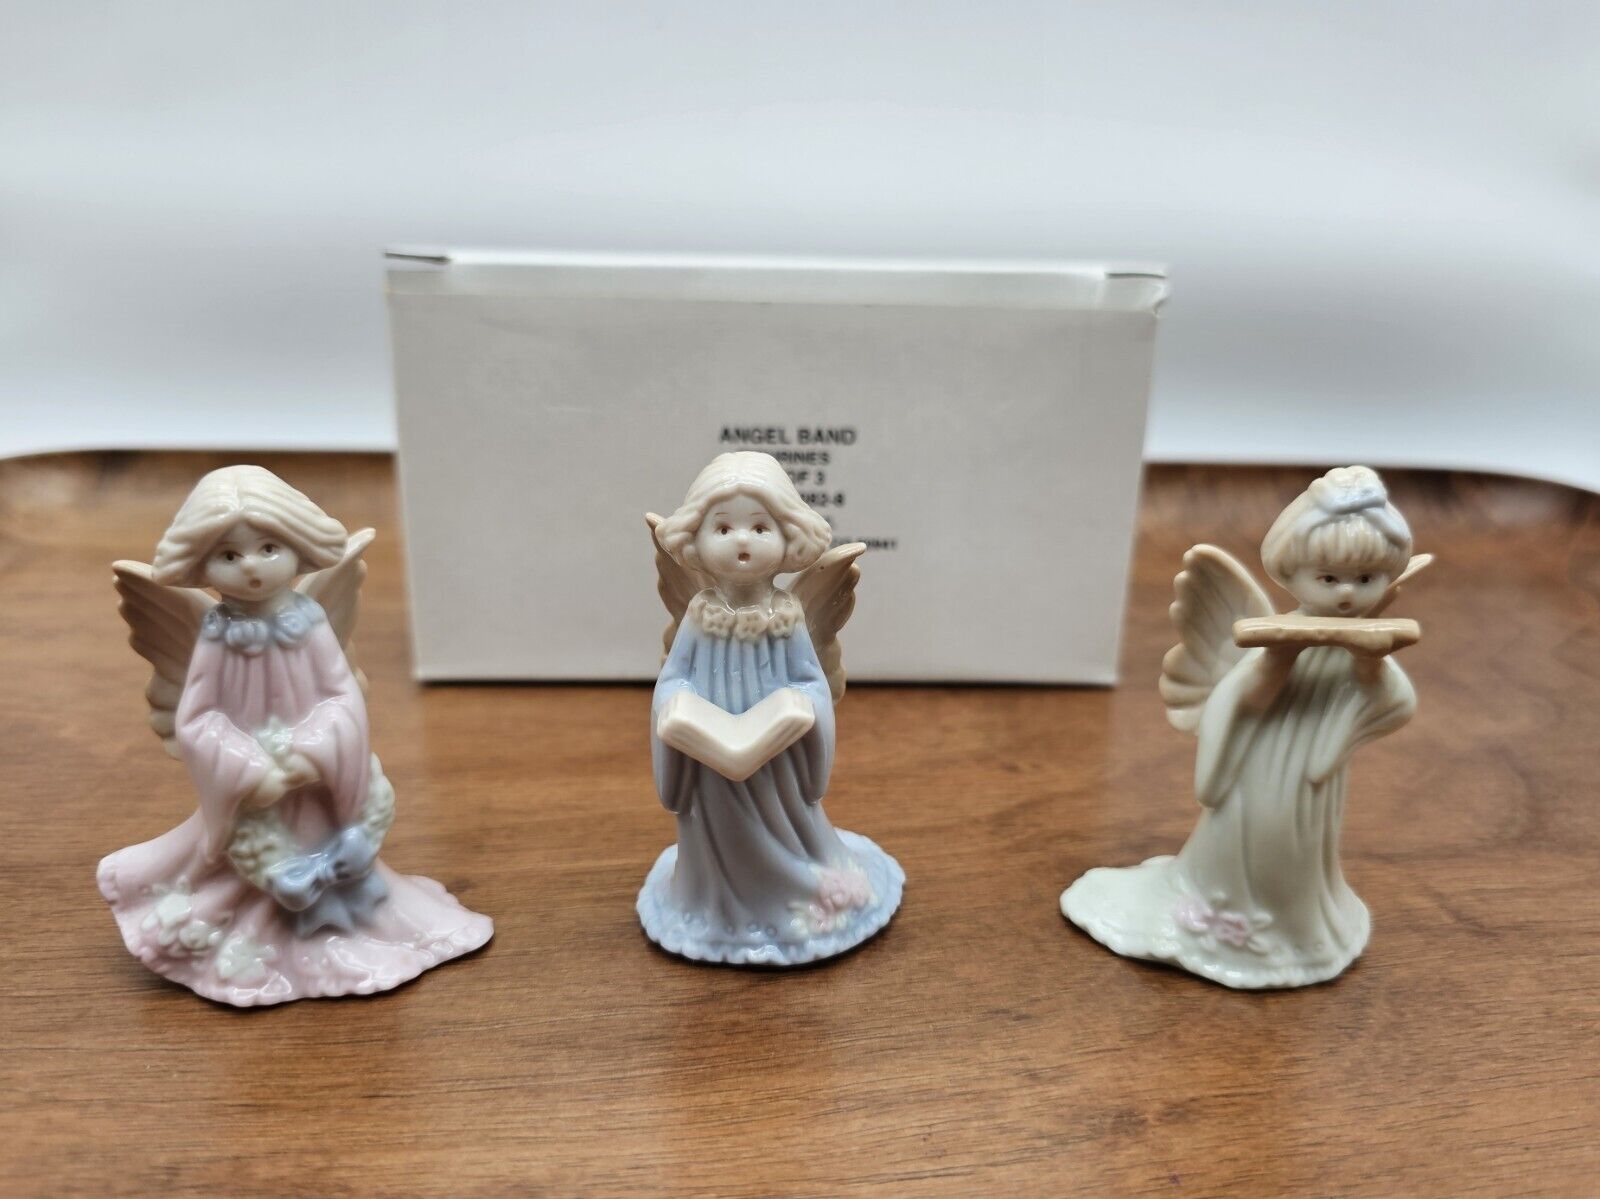 3pc Angel Band Porcelain Figurines by Russ Berrie Current Inc. #15270CI Boxed